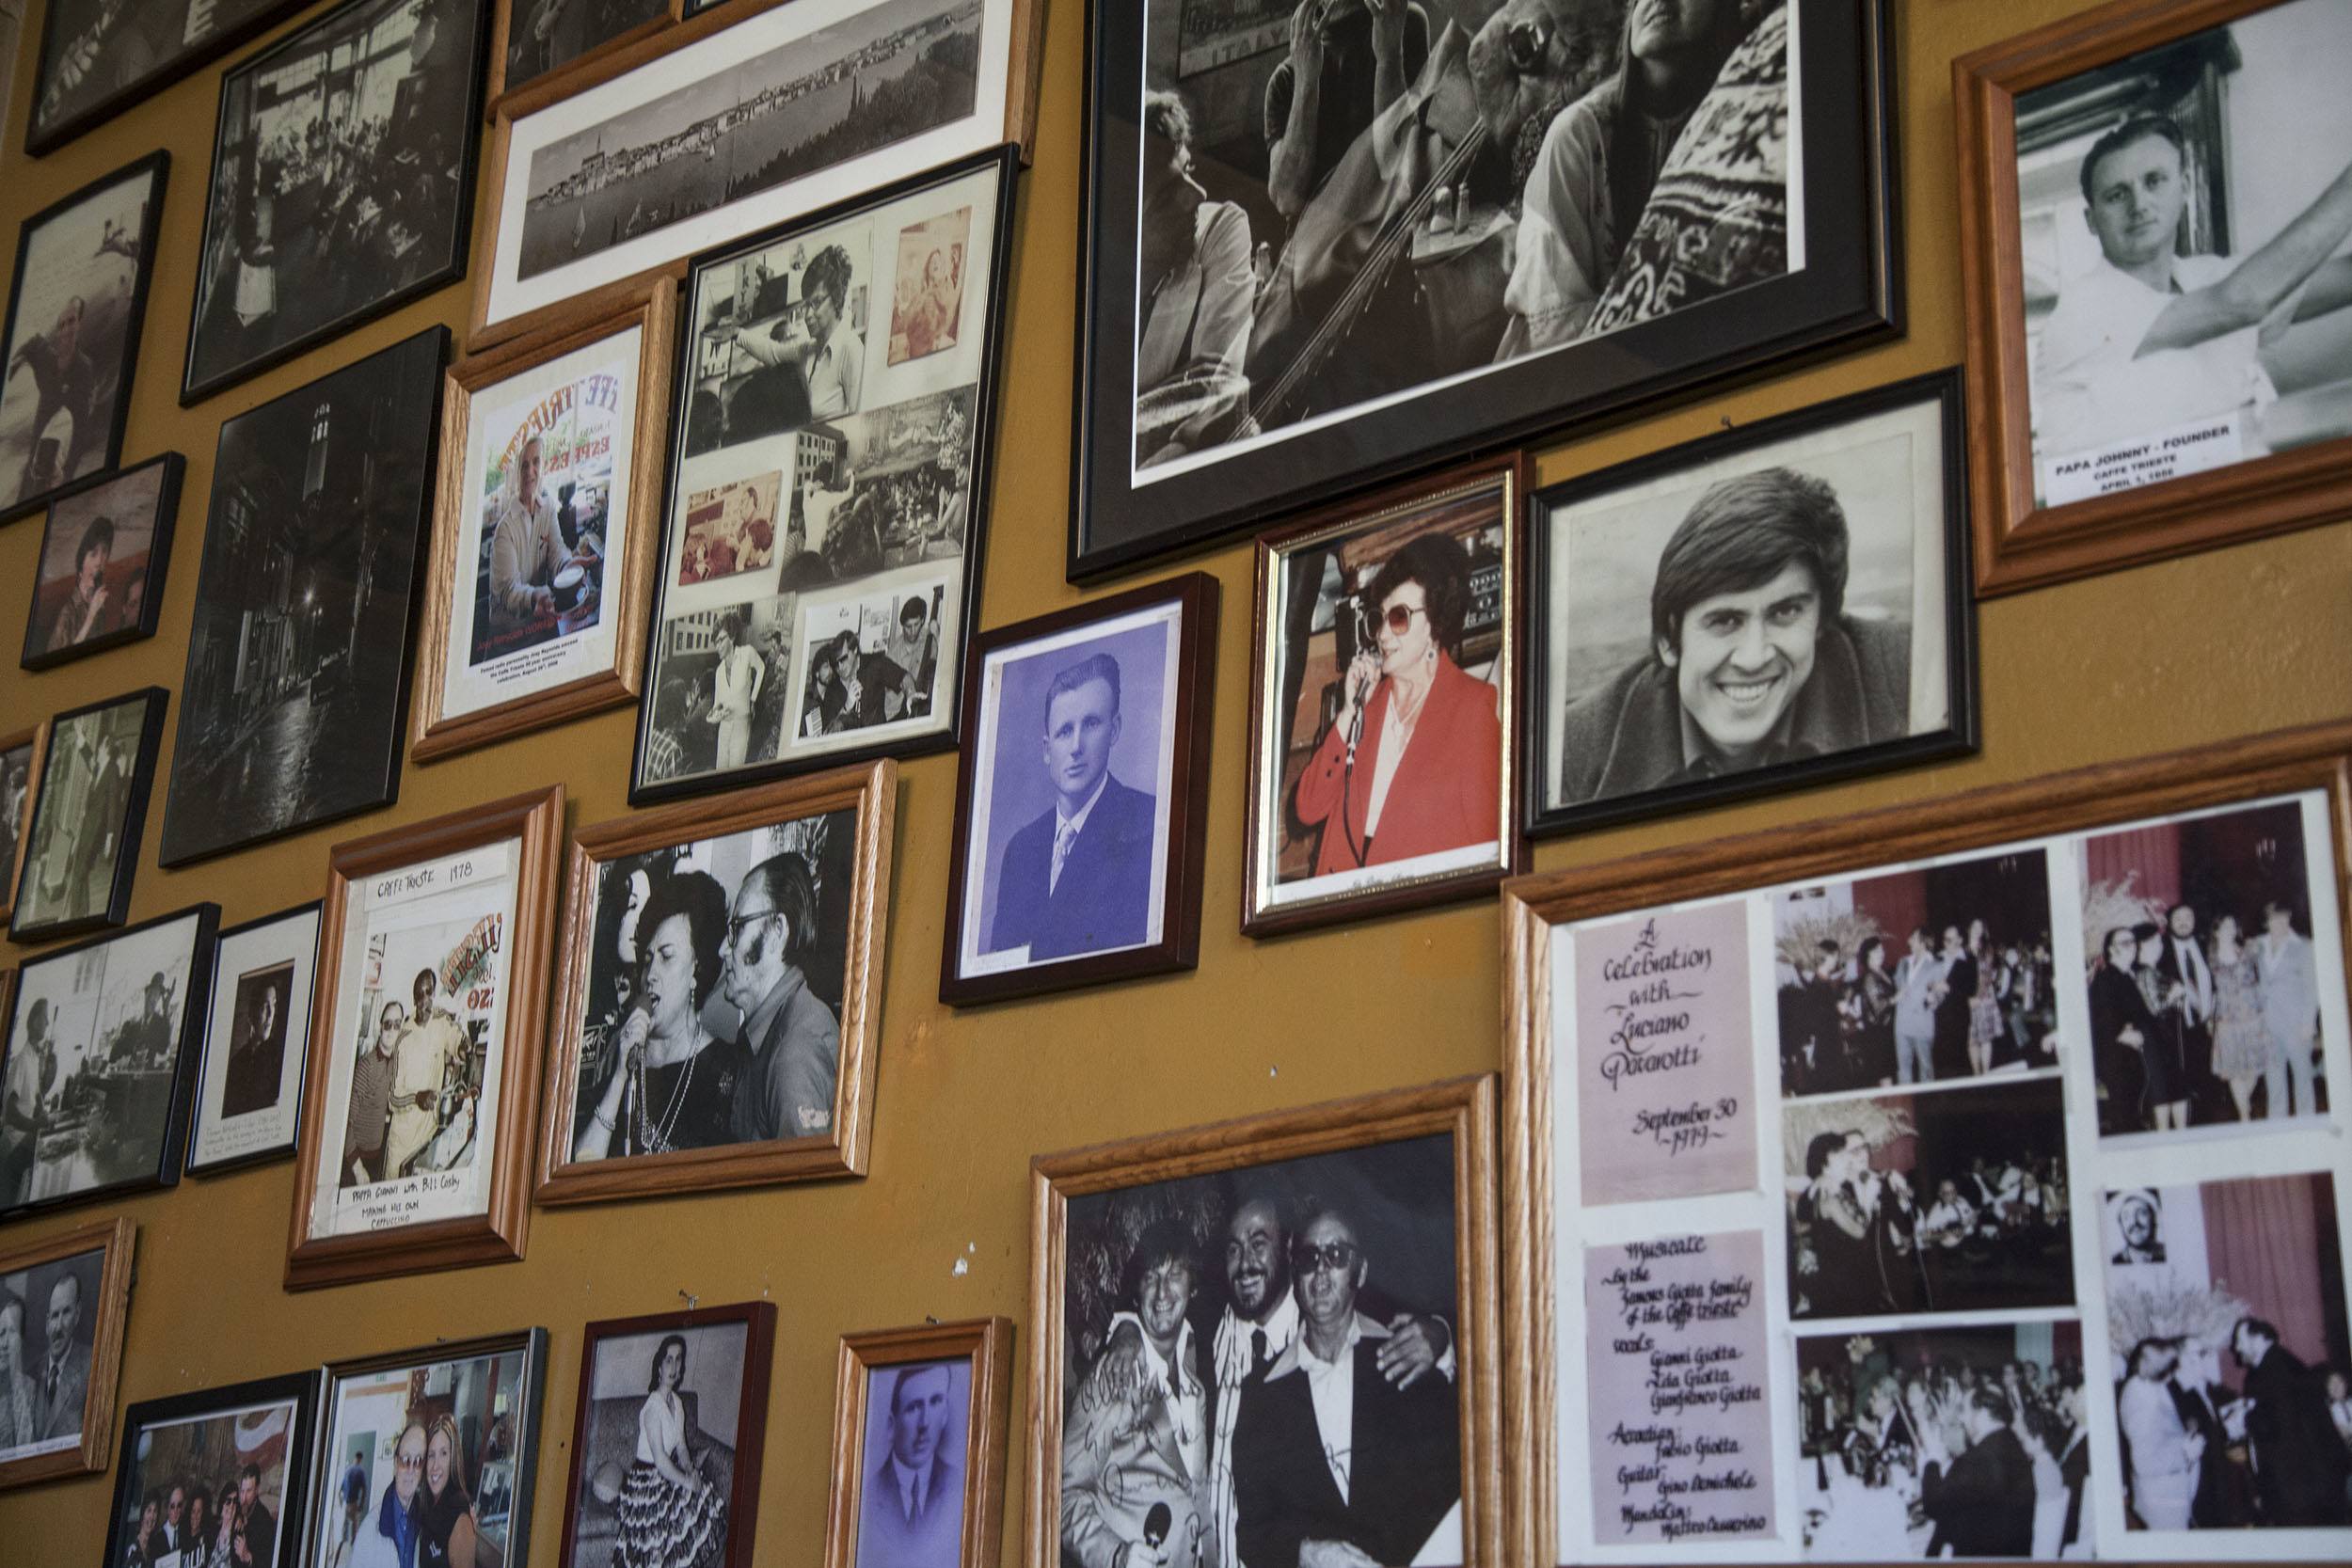 Pictures on the wall of Caffe Trieste in San Francisco USA